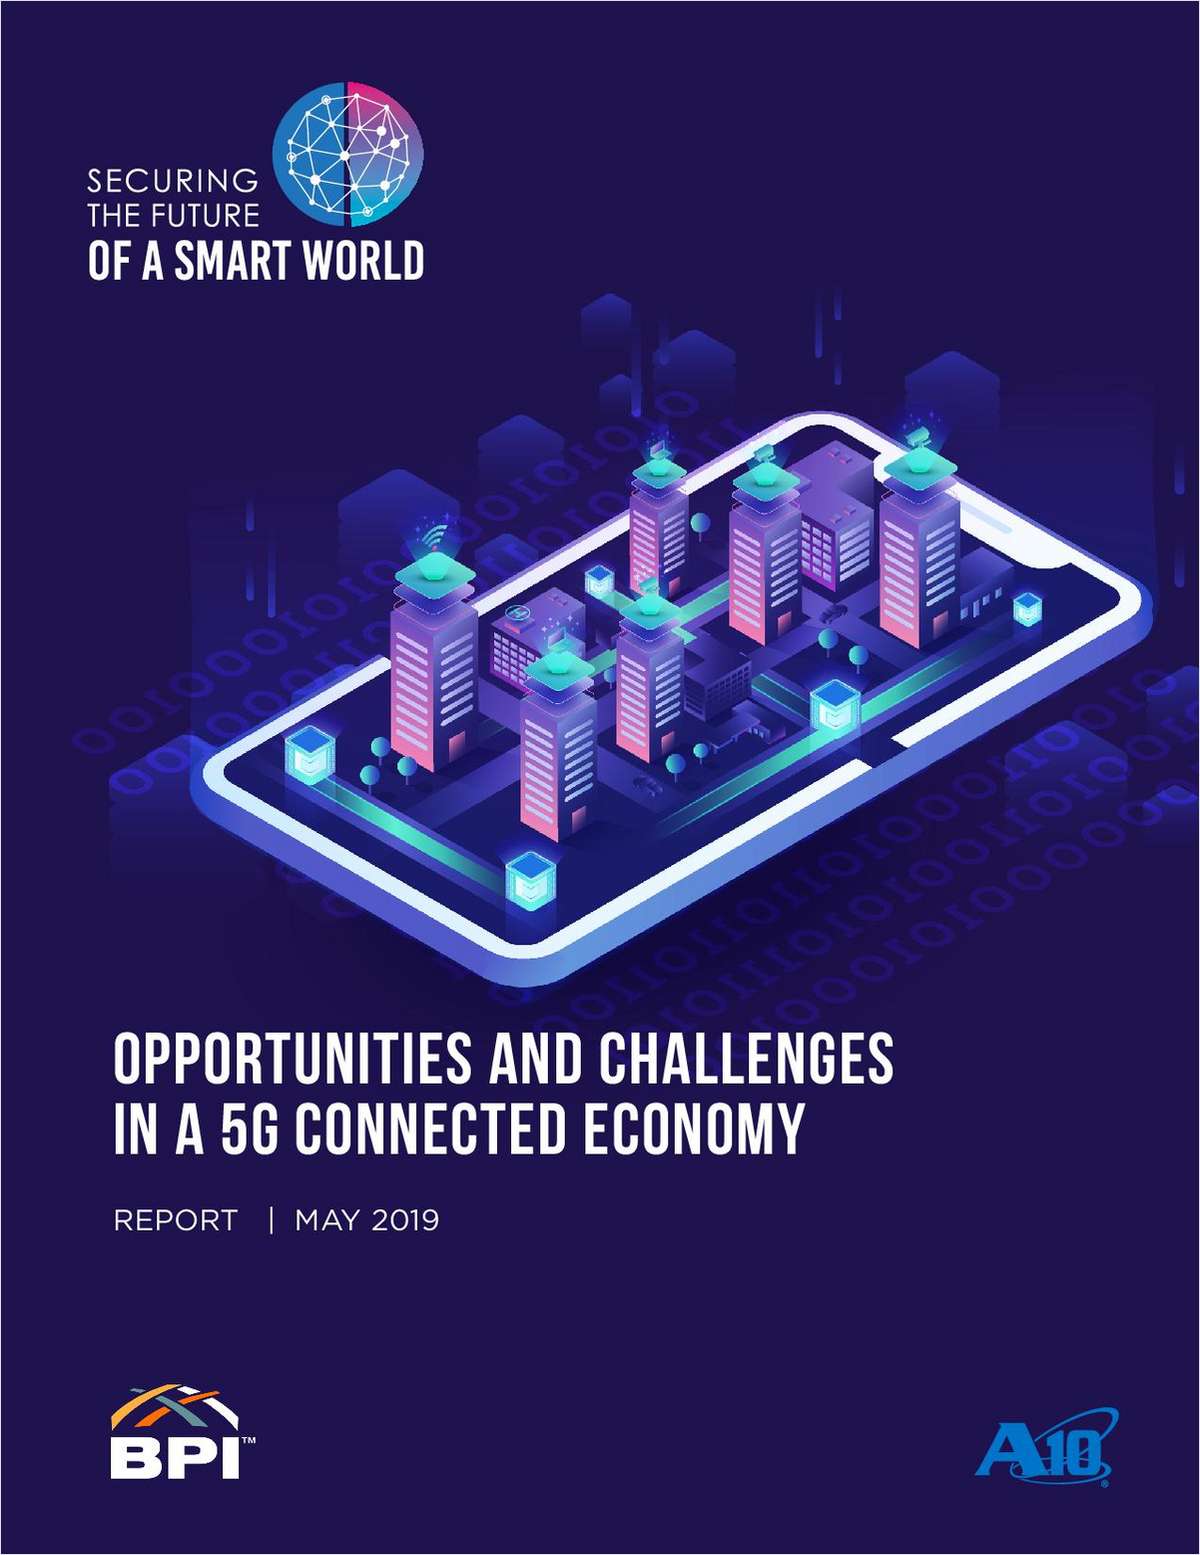 Securing the Future of a Smart World - Opportunities and Challenges in a 5G Connected Economy